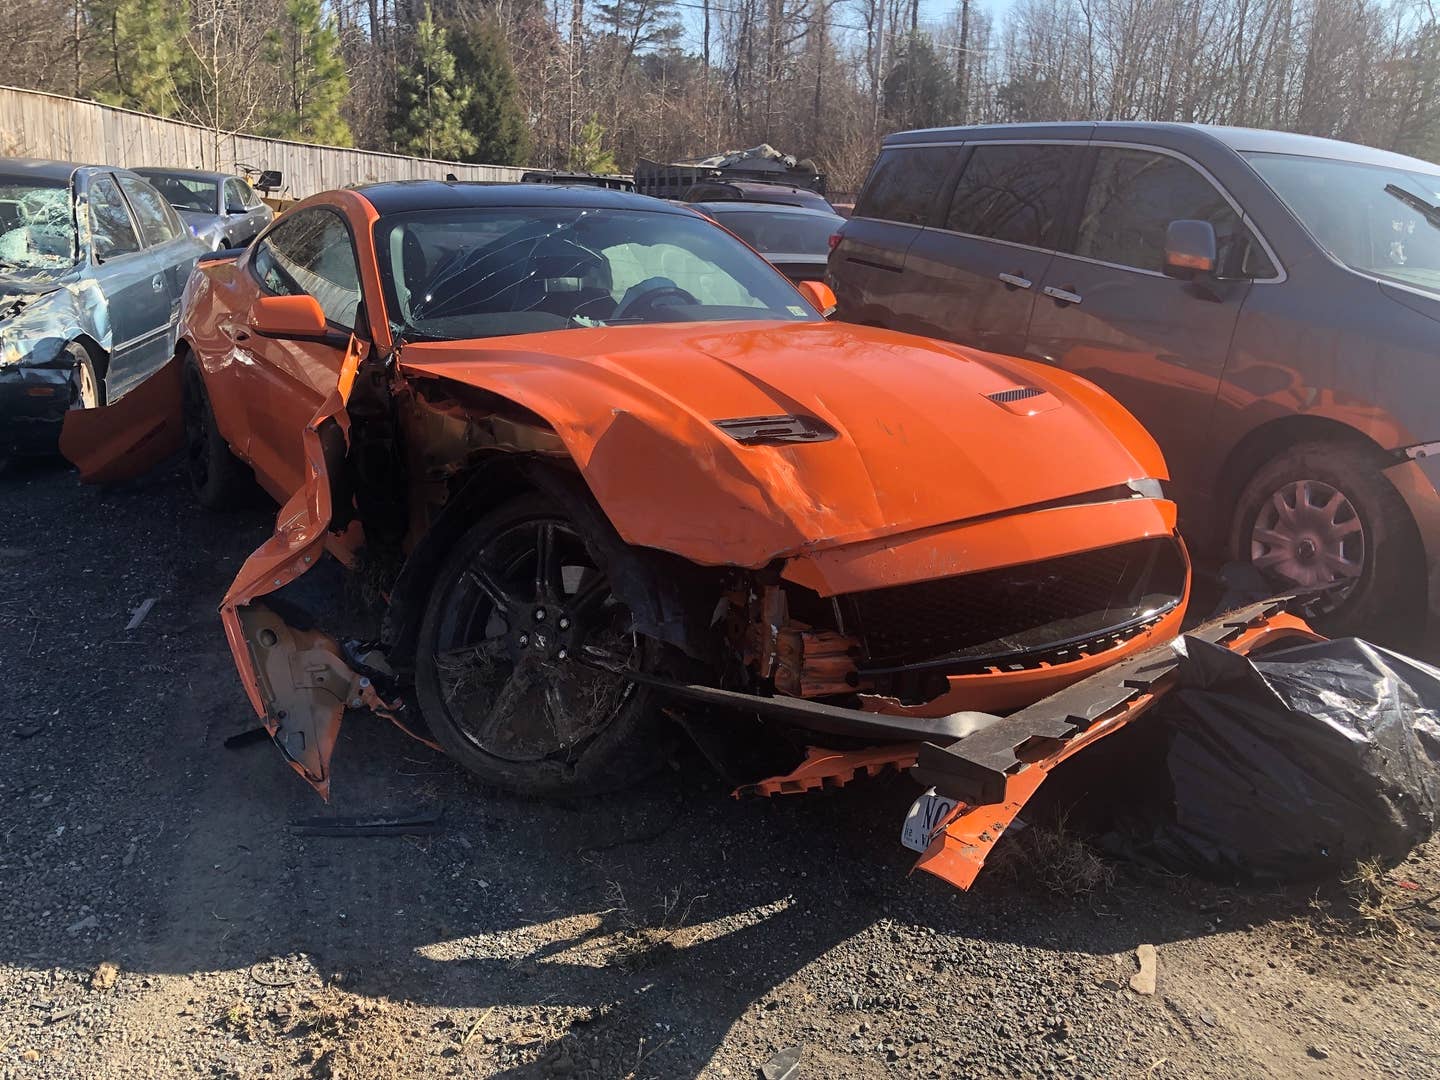 A new Mustang GT wrecked.